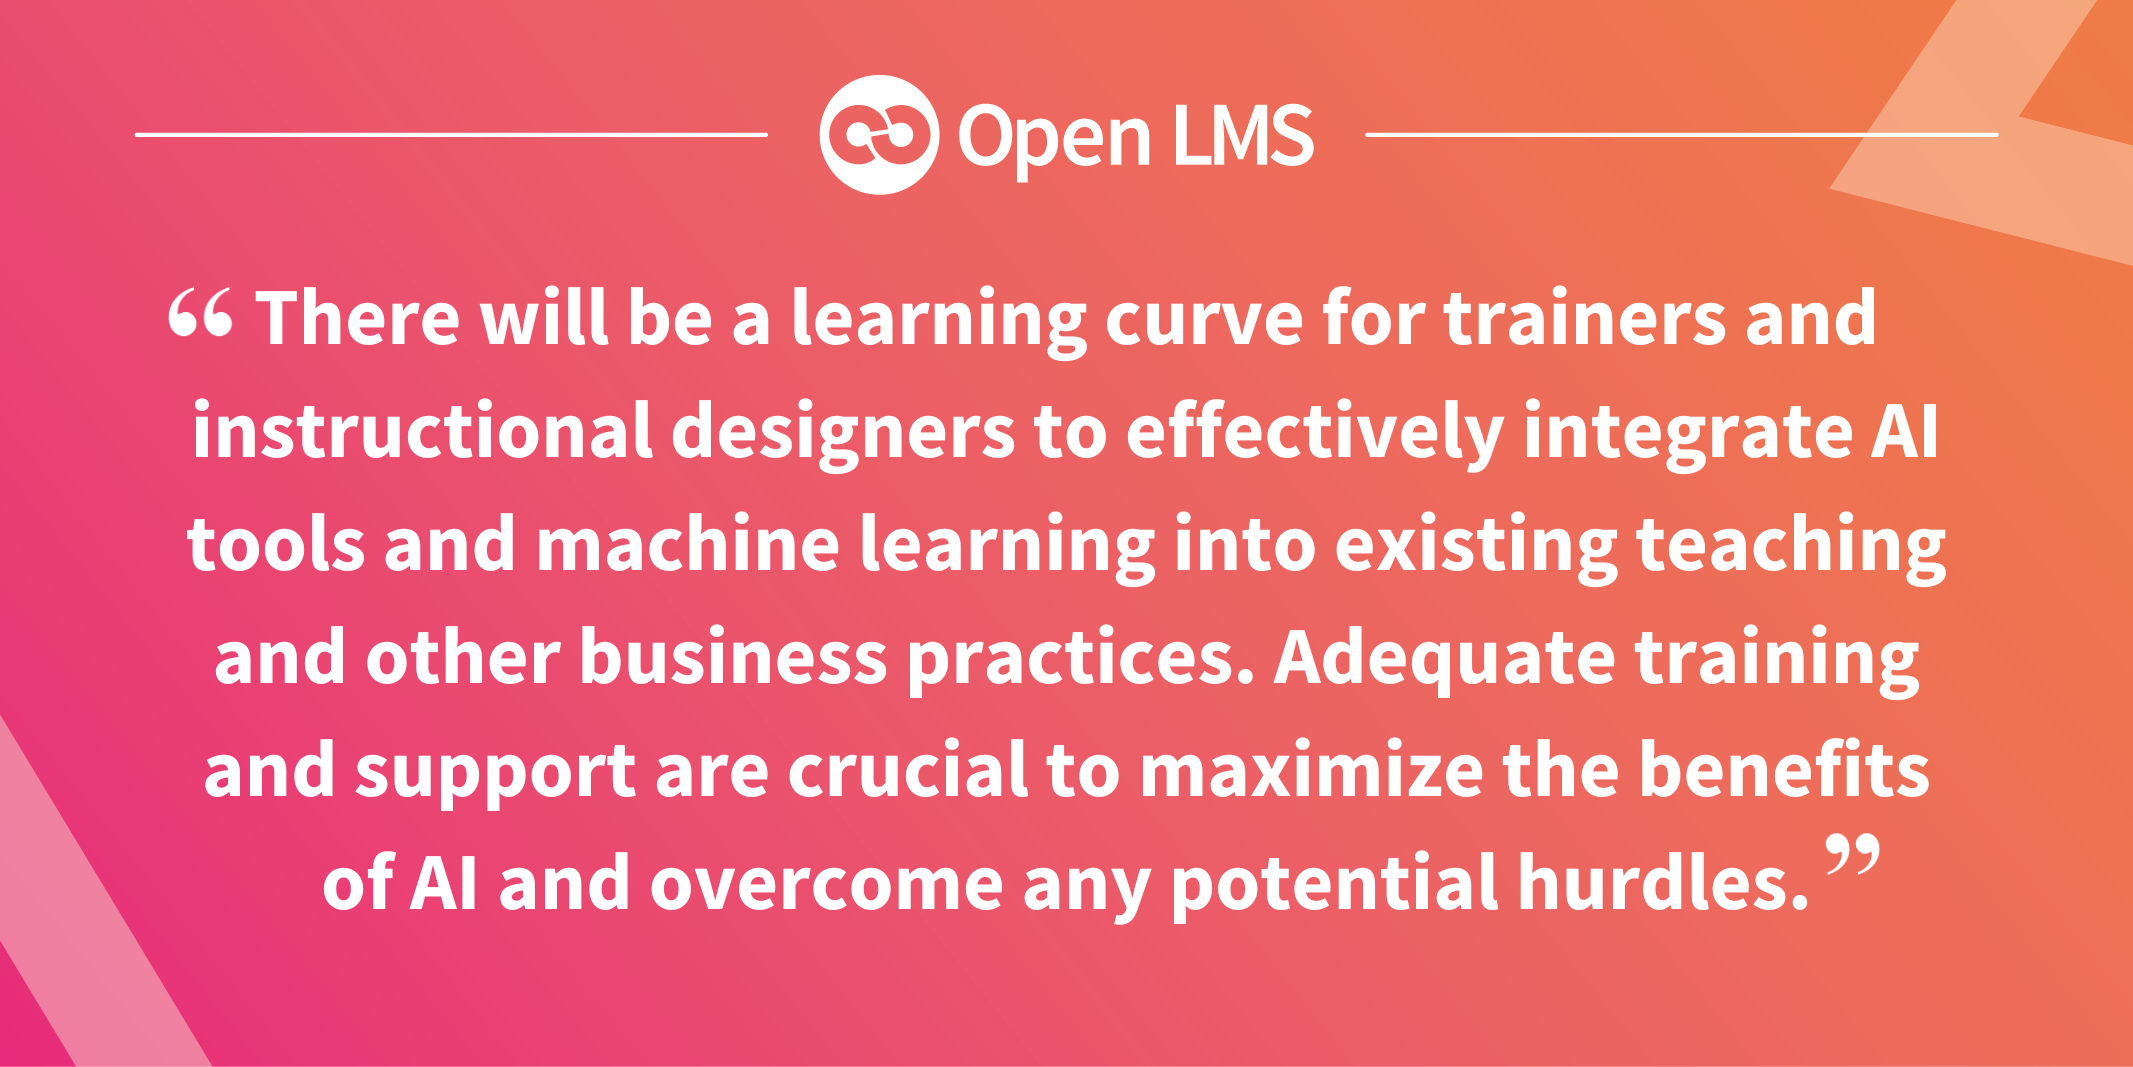 There will be a learning curve for trainers and instructional designers to effectively integrate AI tools and machine learning into existing teaching and other business practices. Adequate training and support are crucial to maximize the benefits of AI and overcome any potential hurdles.